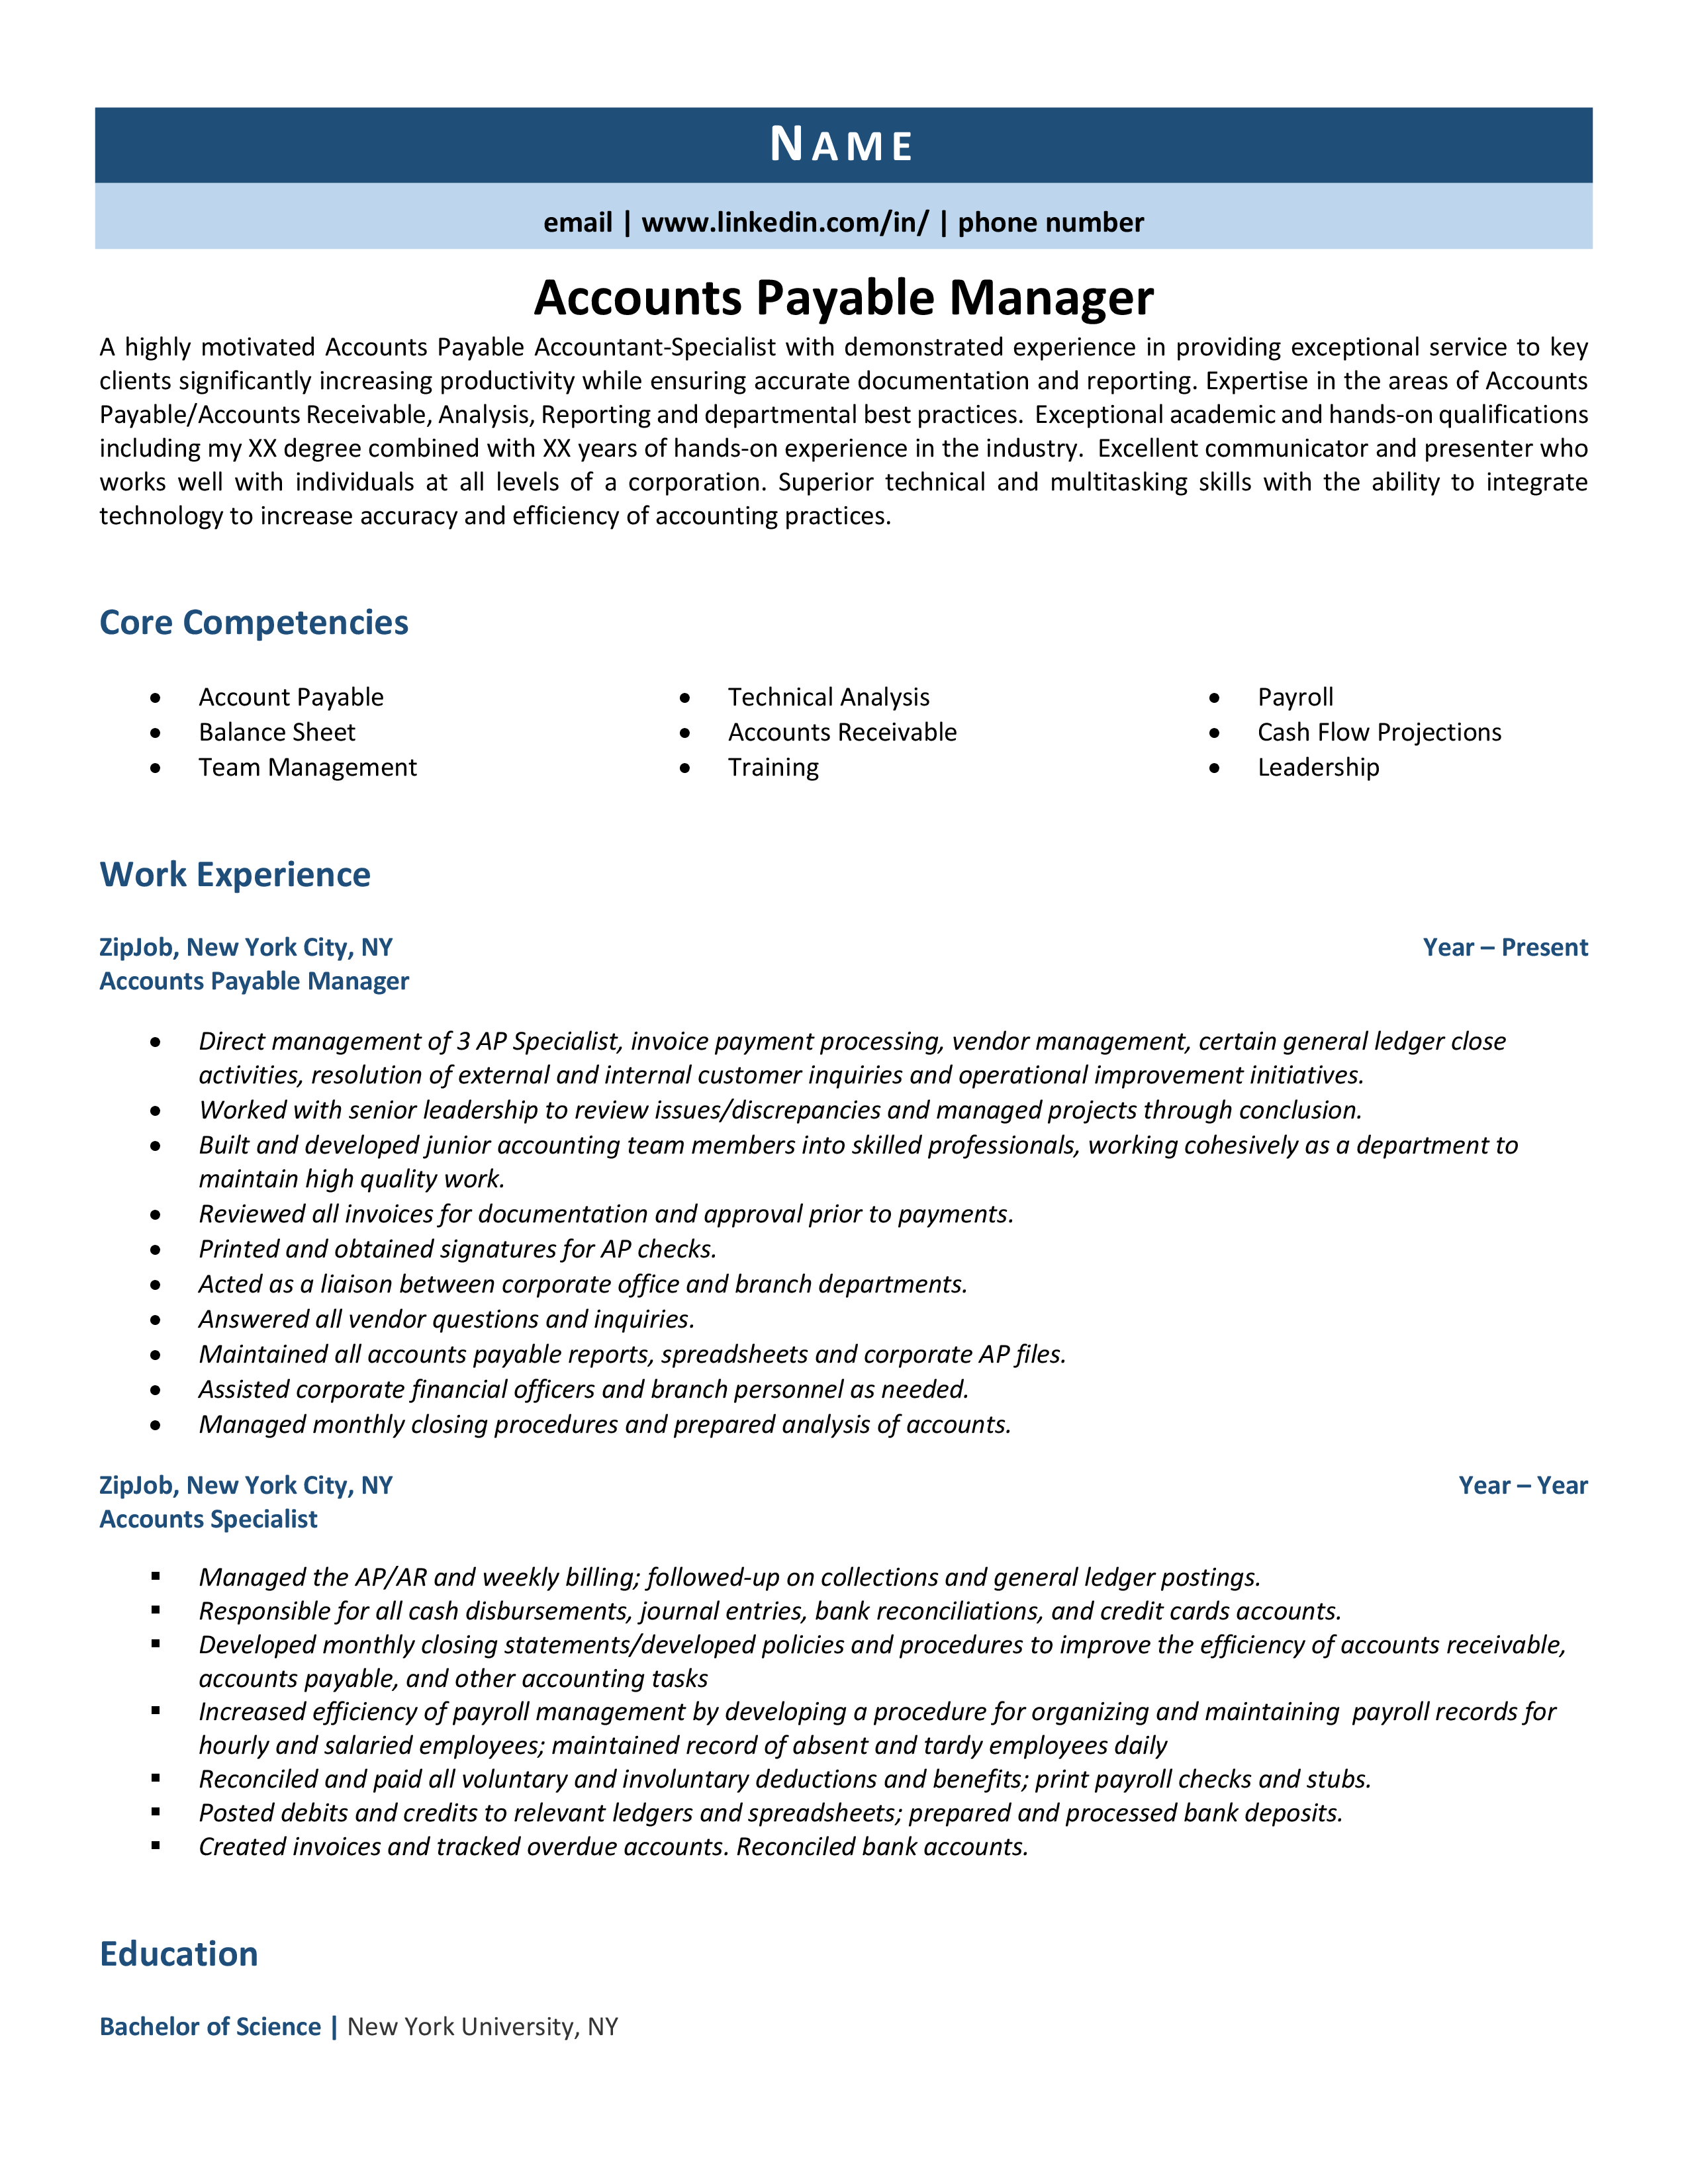 Accounts Payable Manager Resume Example Guide ZipJob